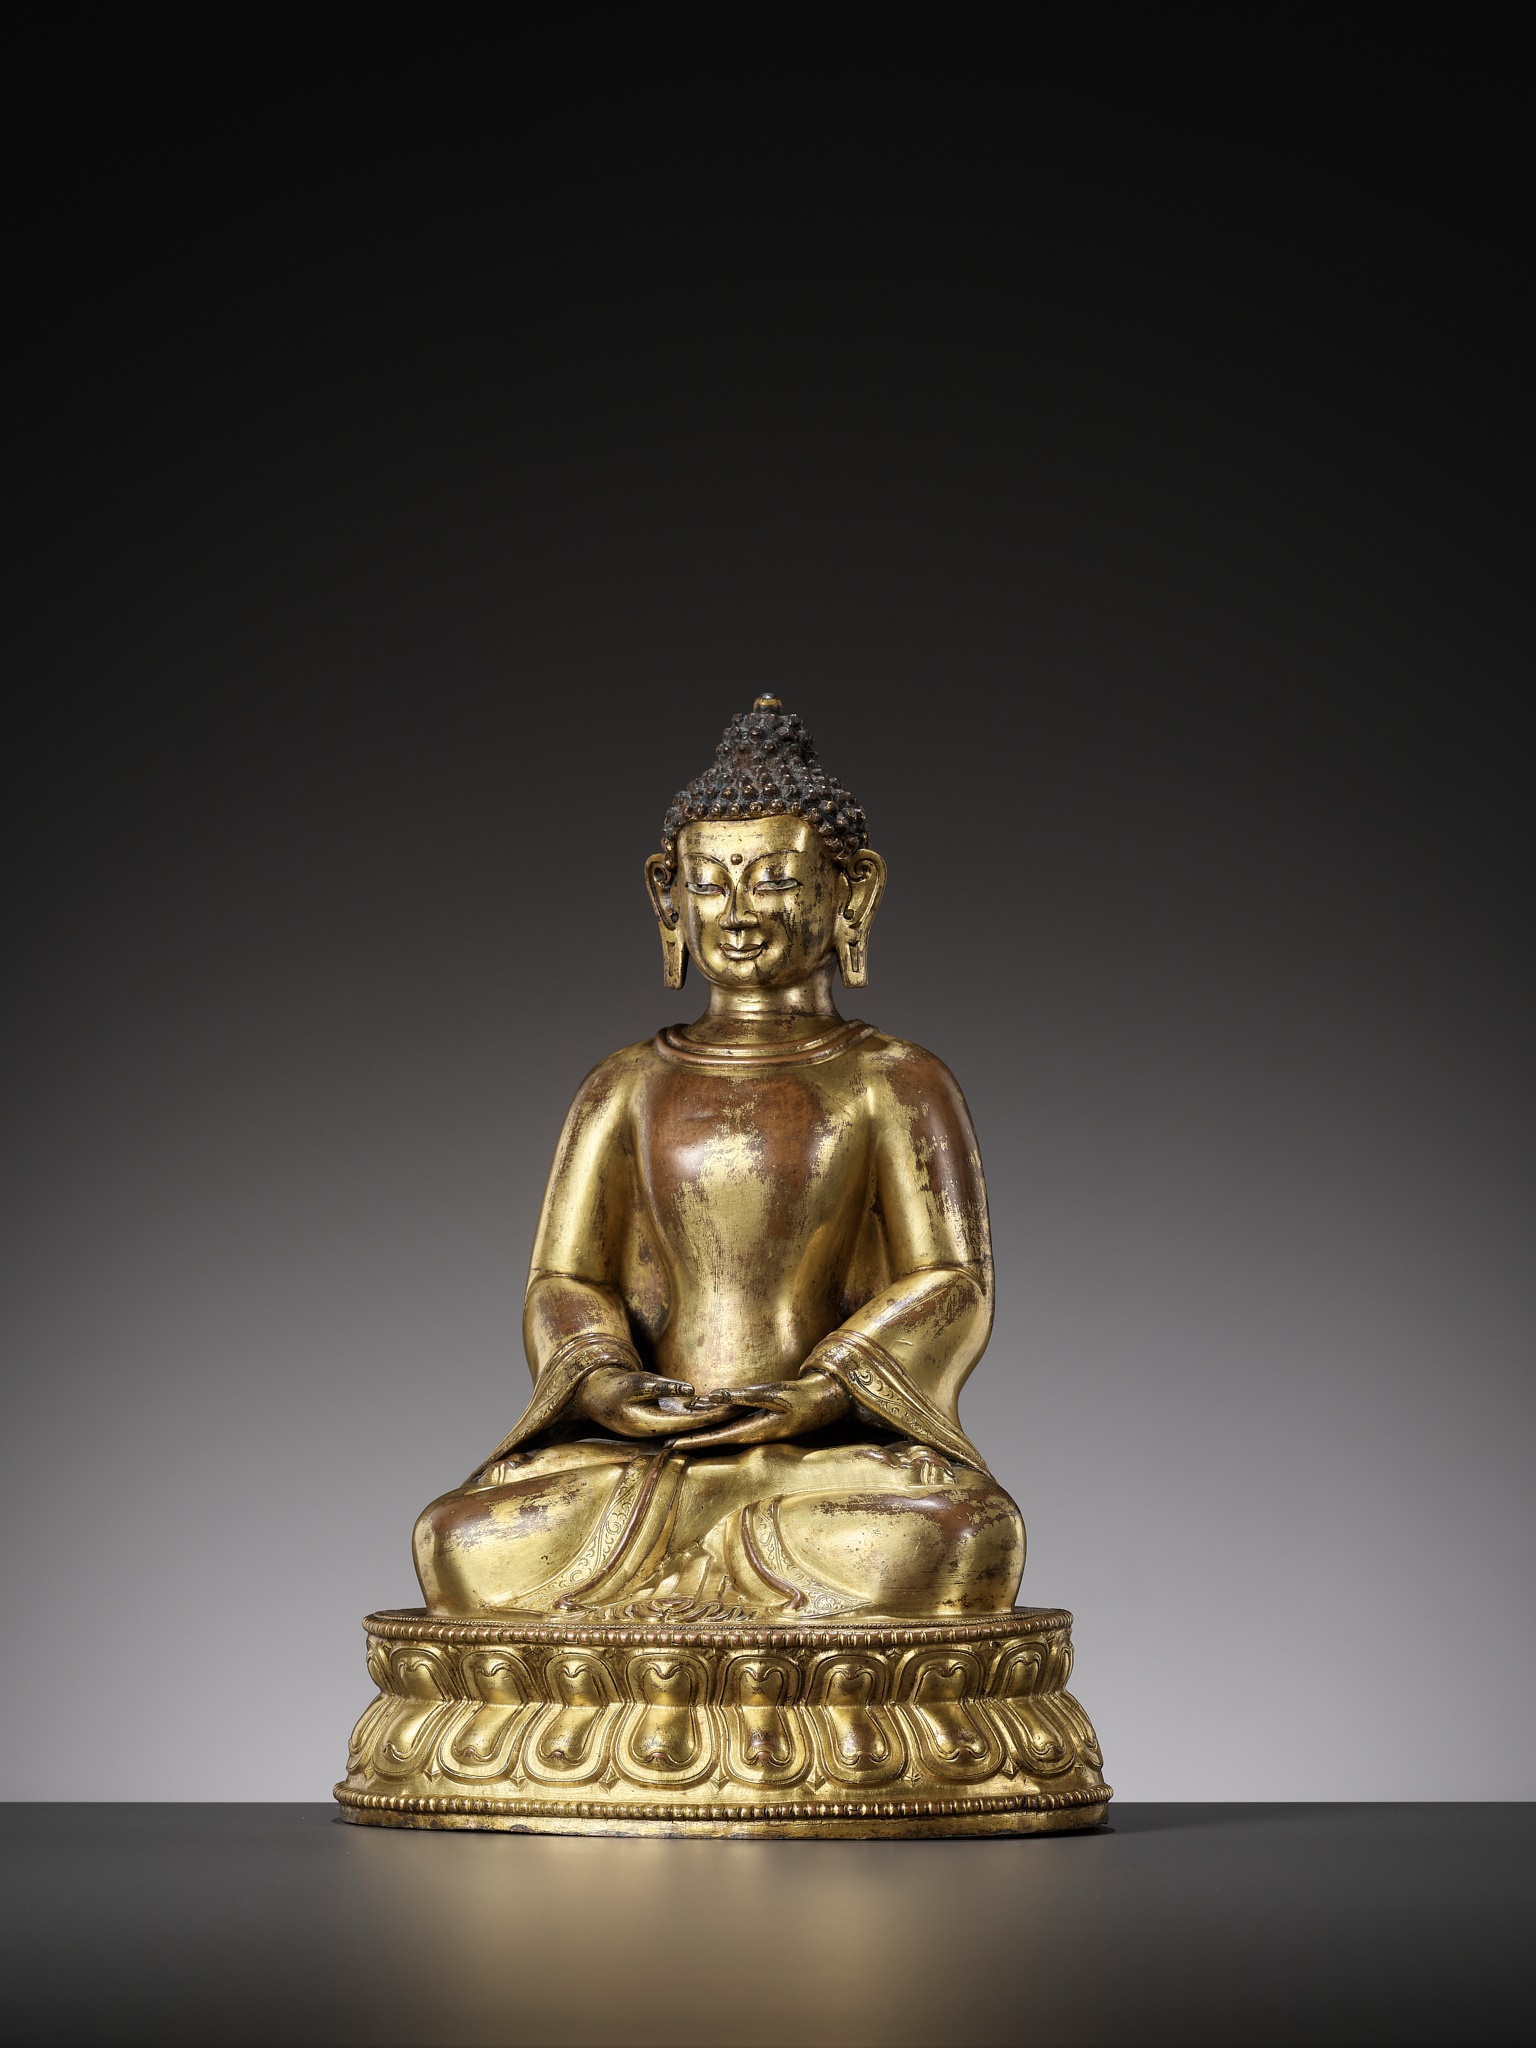 A GILT COPPER-ALLOY REPOUSSE FIGURE OF BUDDHA AMITABHA, WITH AN INSCRIPTION REFERRING TO THE SECOND - Image 6 of 16